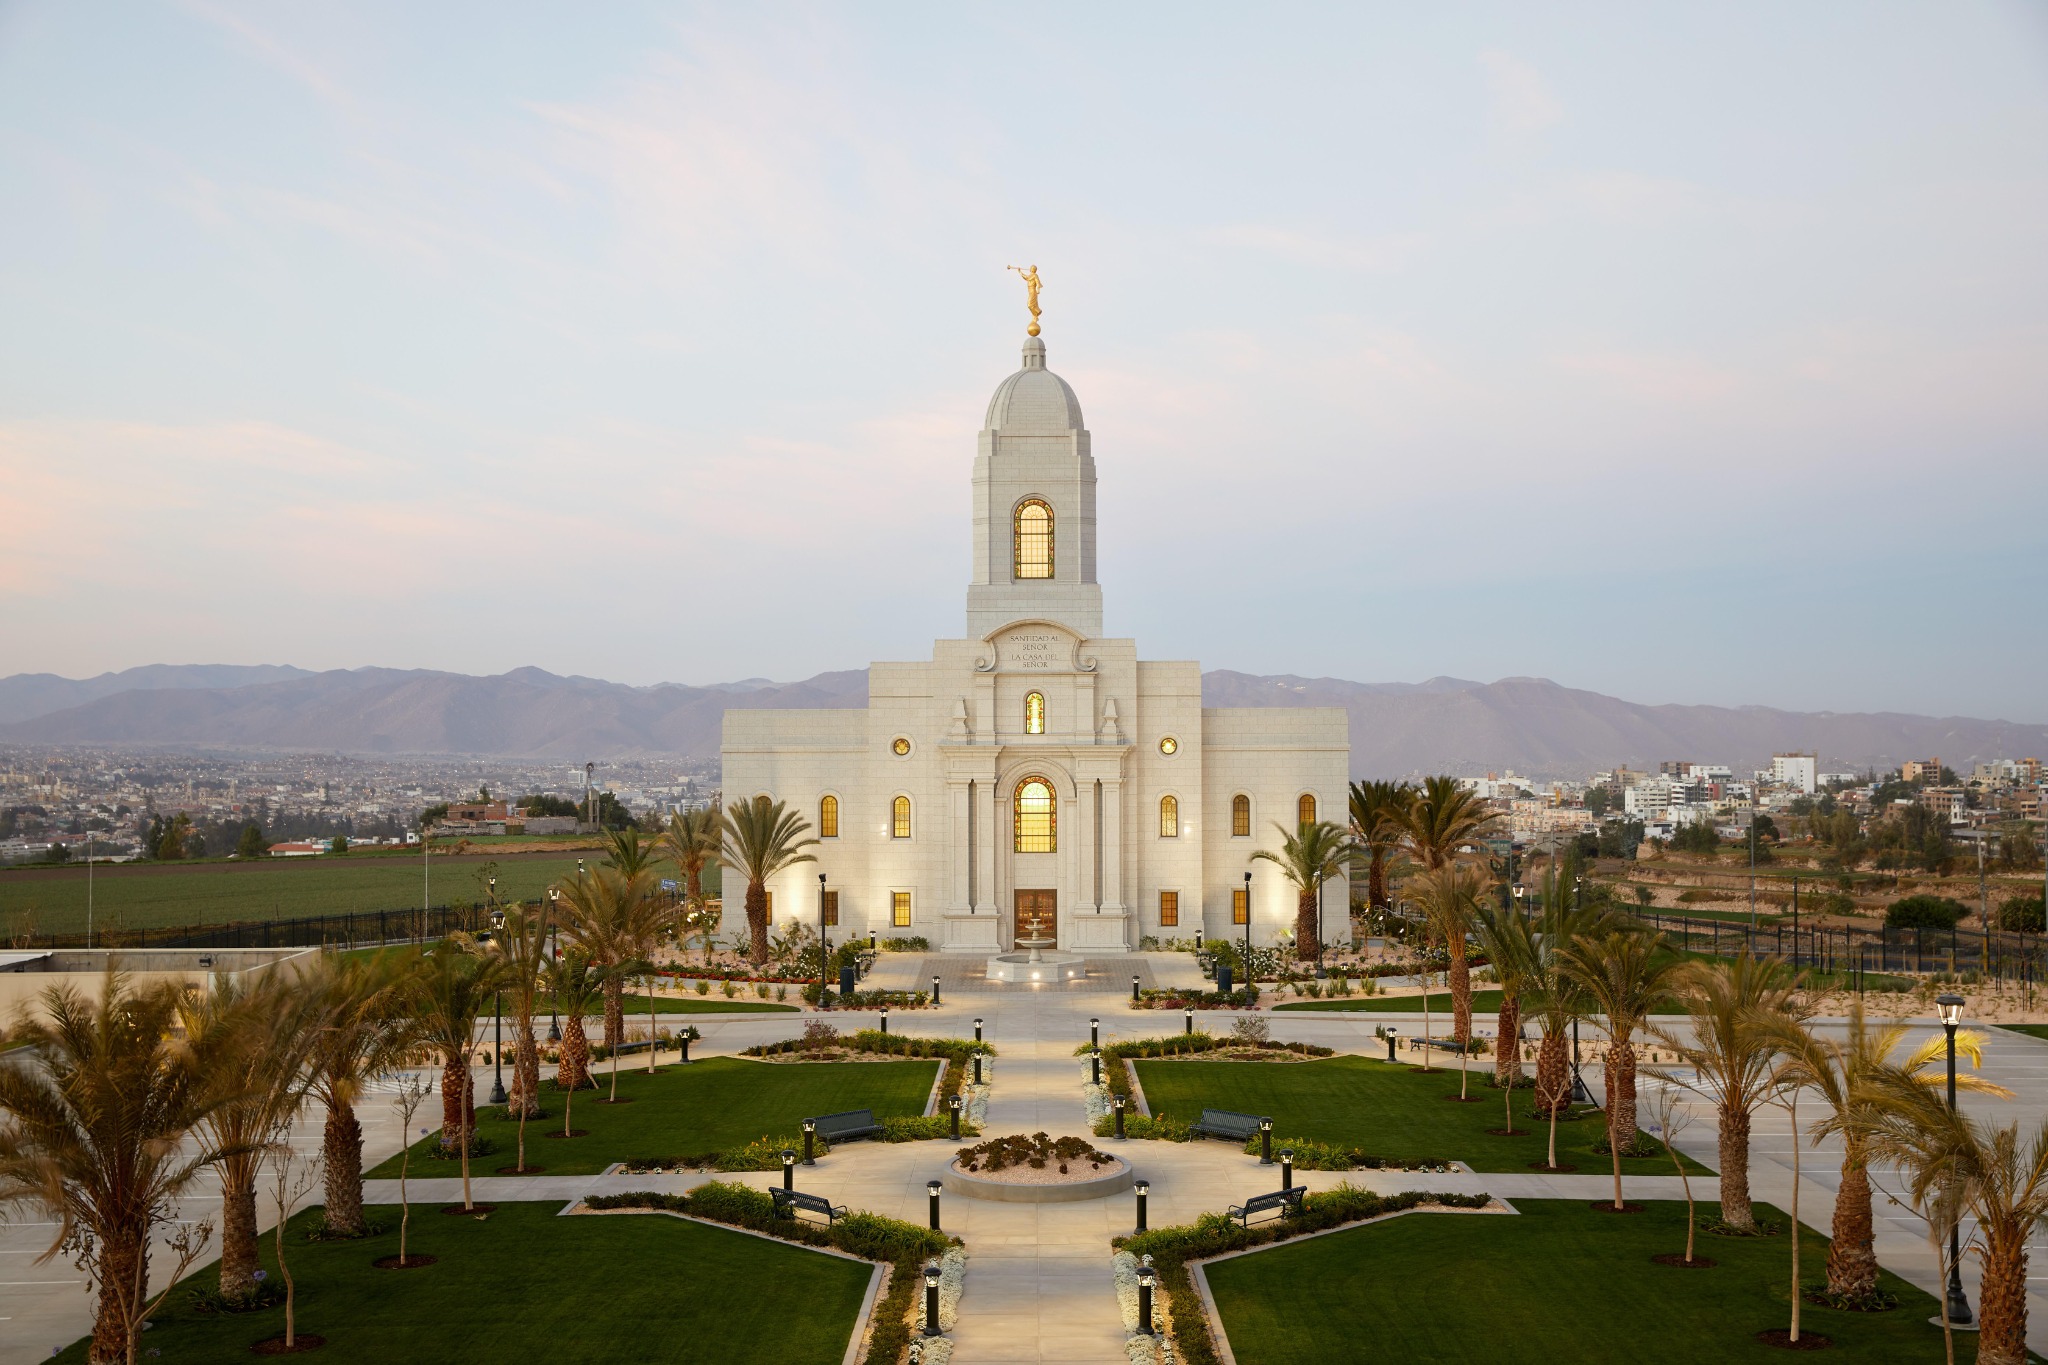 The exterior of the Arequipa Peru Temple, a white, rectangular building with arched windows and a center domed spire.